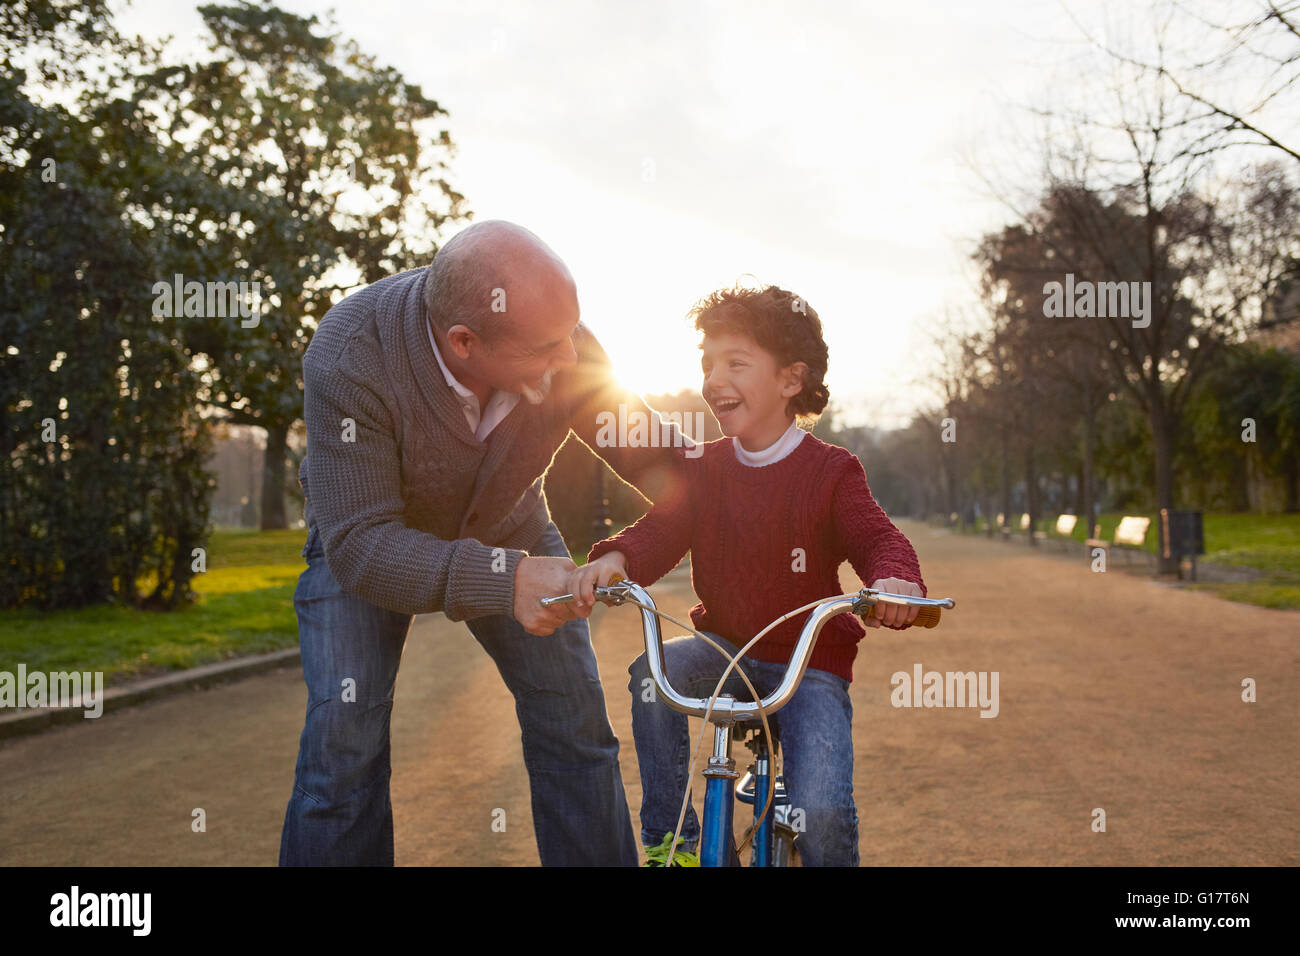 Grandfather teaching grandson to ride bicycle in park Stock Photo